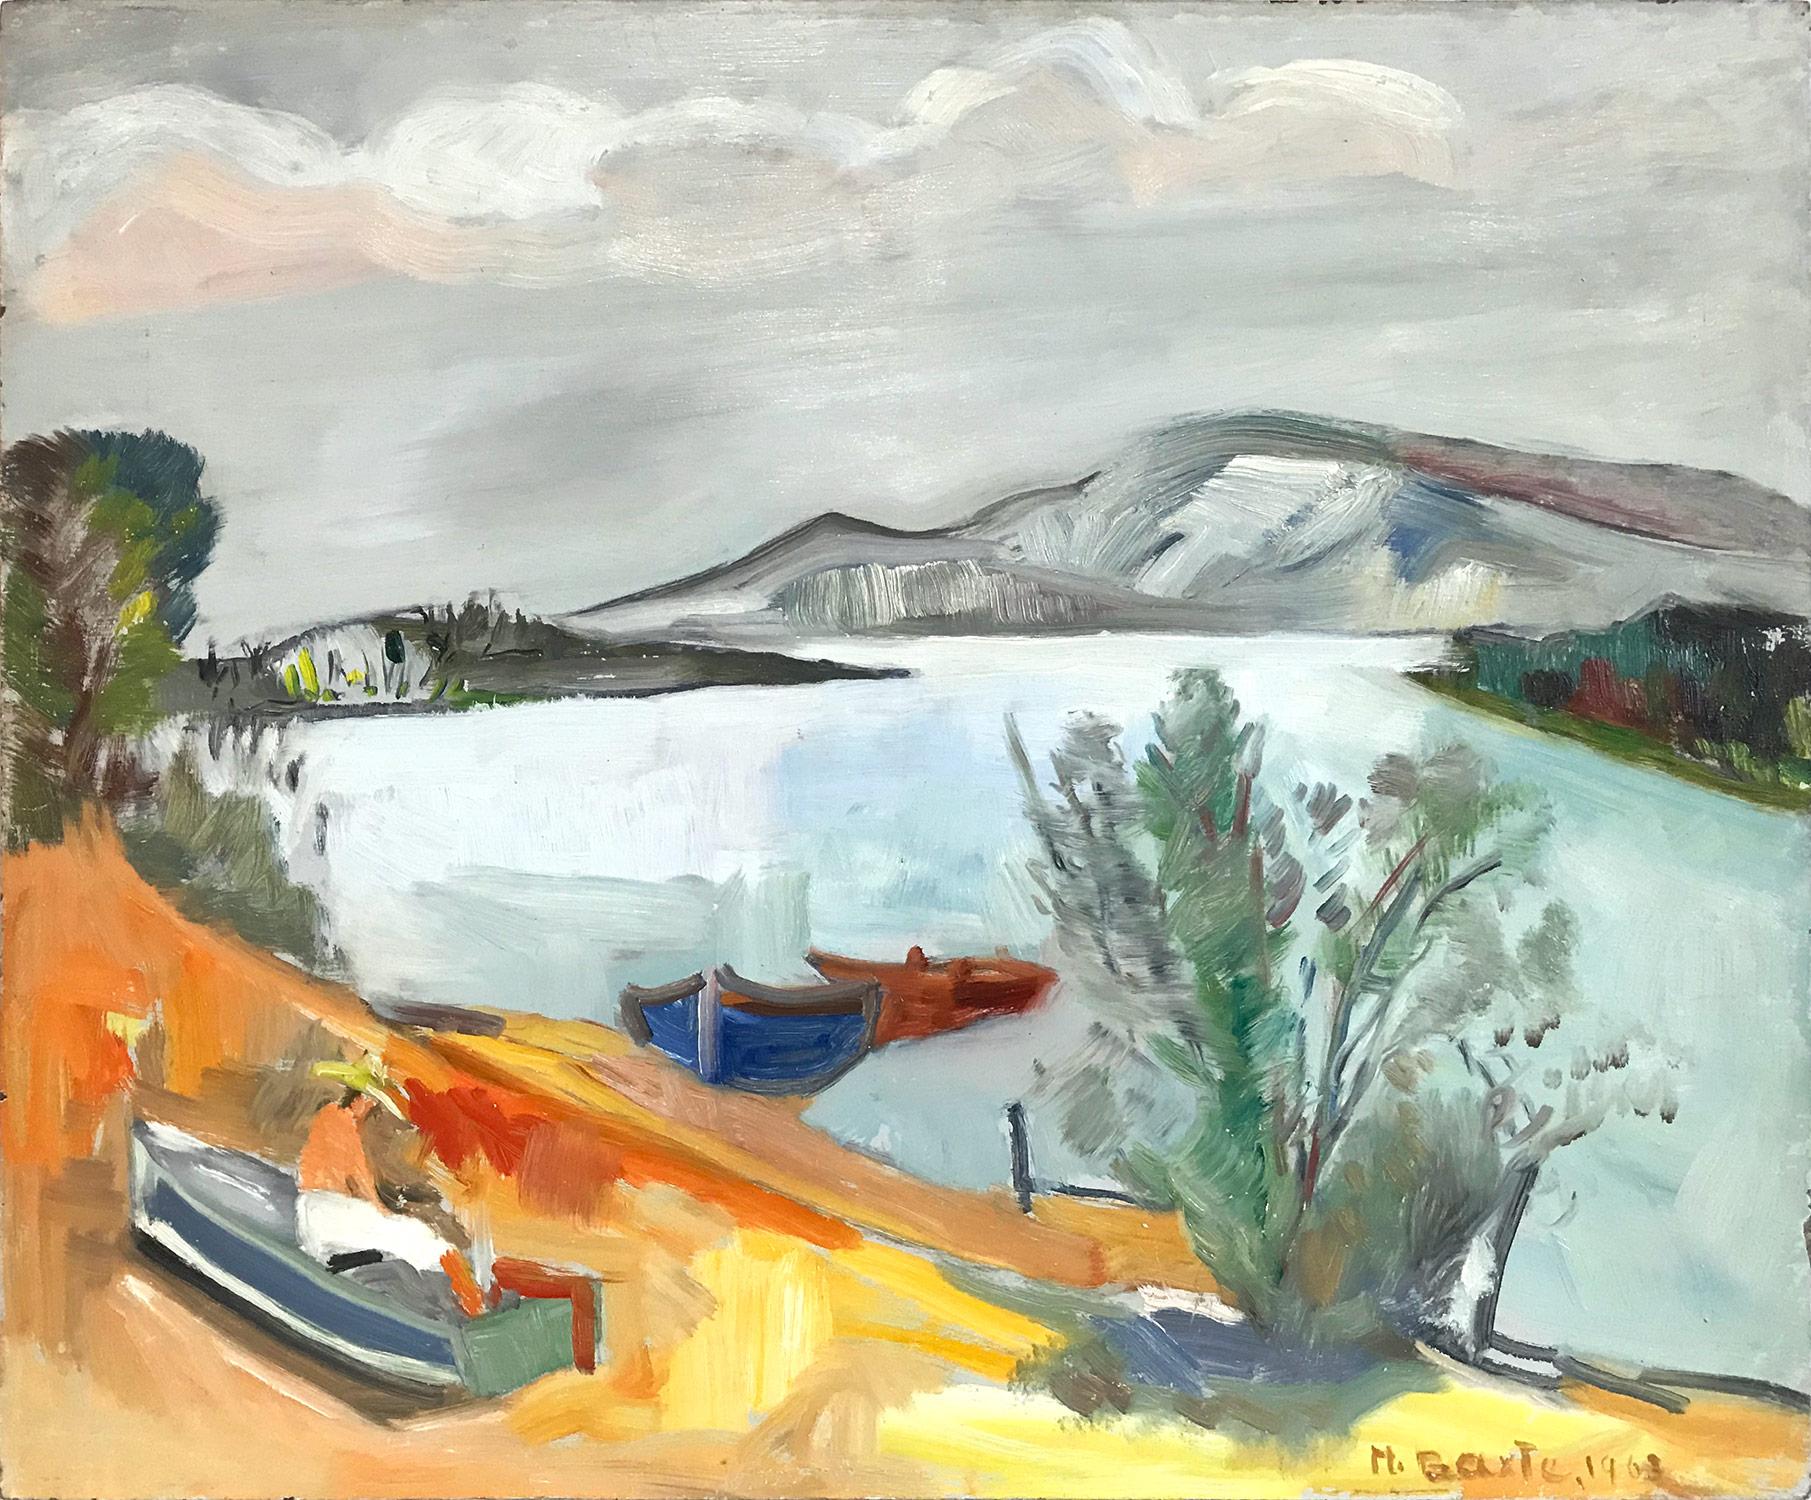 "Landscape Scene with Fisherman by Lake" Expressionistic Oil Painting on Board